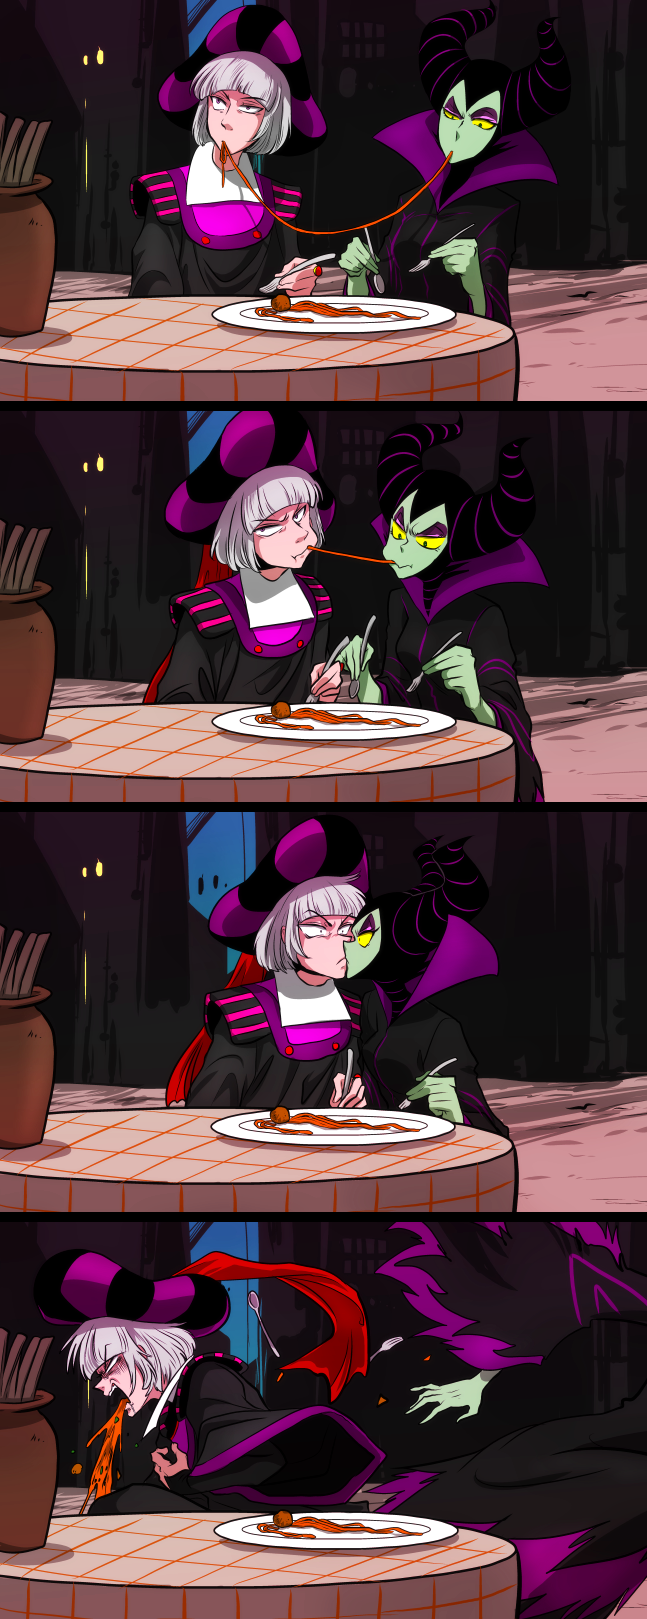 1boy 1girl 4koma accidental_kiss claude_frollo comic disney eyeshadow food fork green_skin hat highres hood horns kiss lady_and_the_tramp makeup maleficent marimo_(yousei_ranbu) one_man's_dream_ii parody plate shared_food silent_comic silver_hair sleeping_beauty spaghetti spaghetti_and_meatballs the_hunchback_of_notre_dame vomit yellow_sclera younger